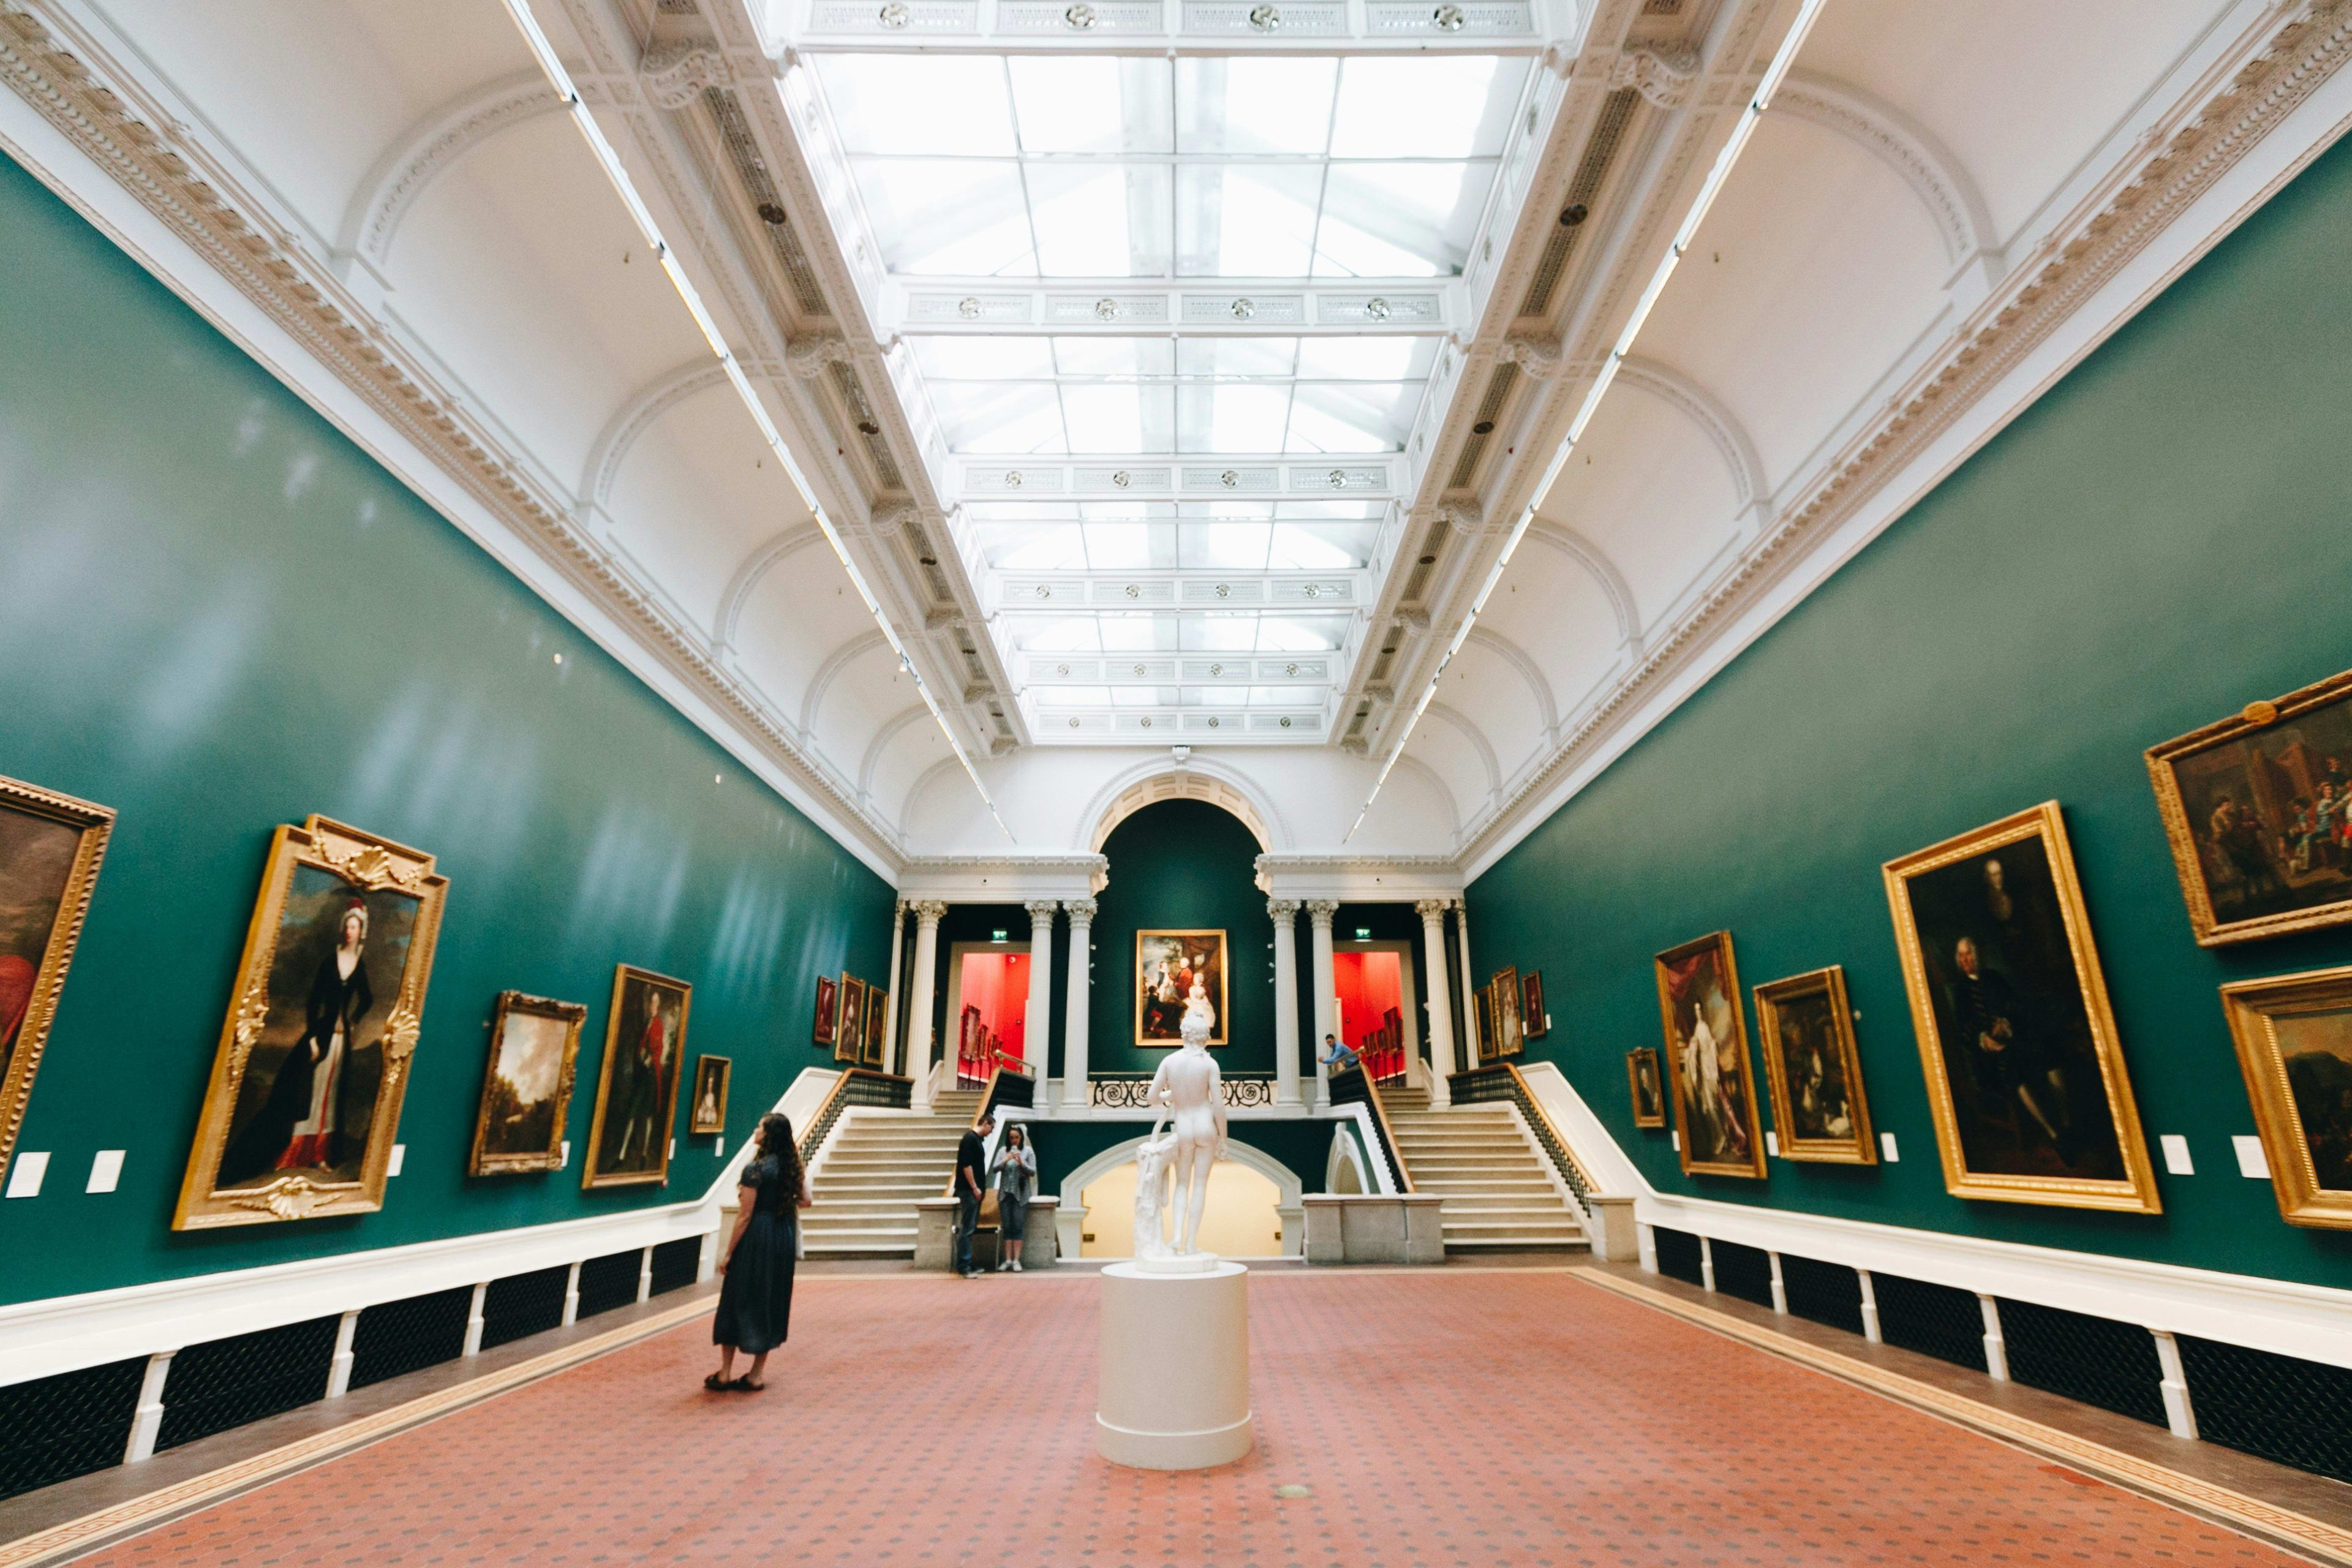 The National Gallery of Ireland in Dublin City